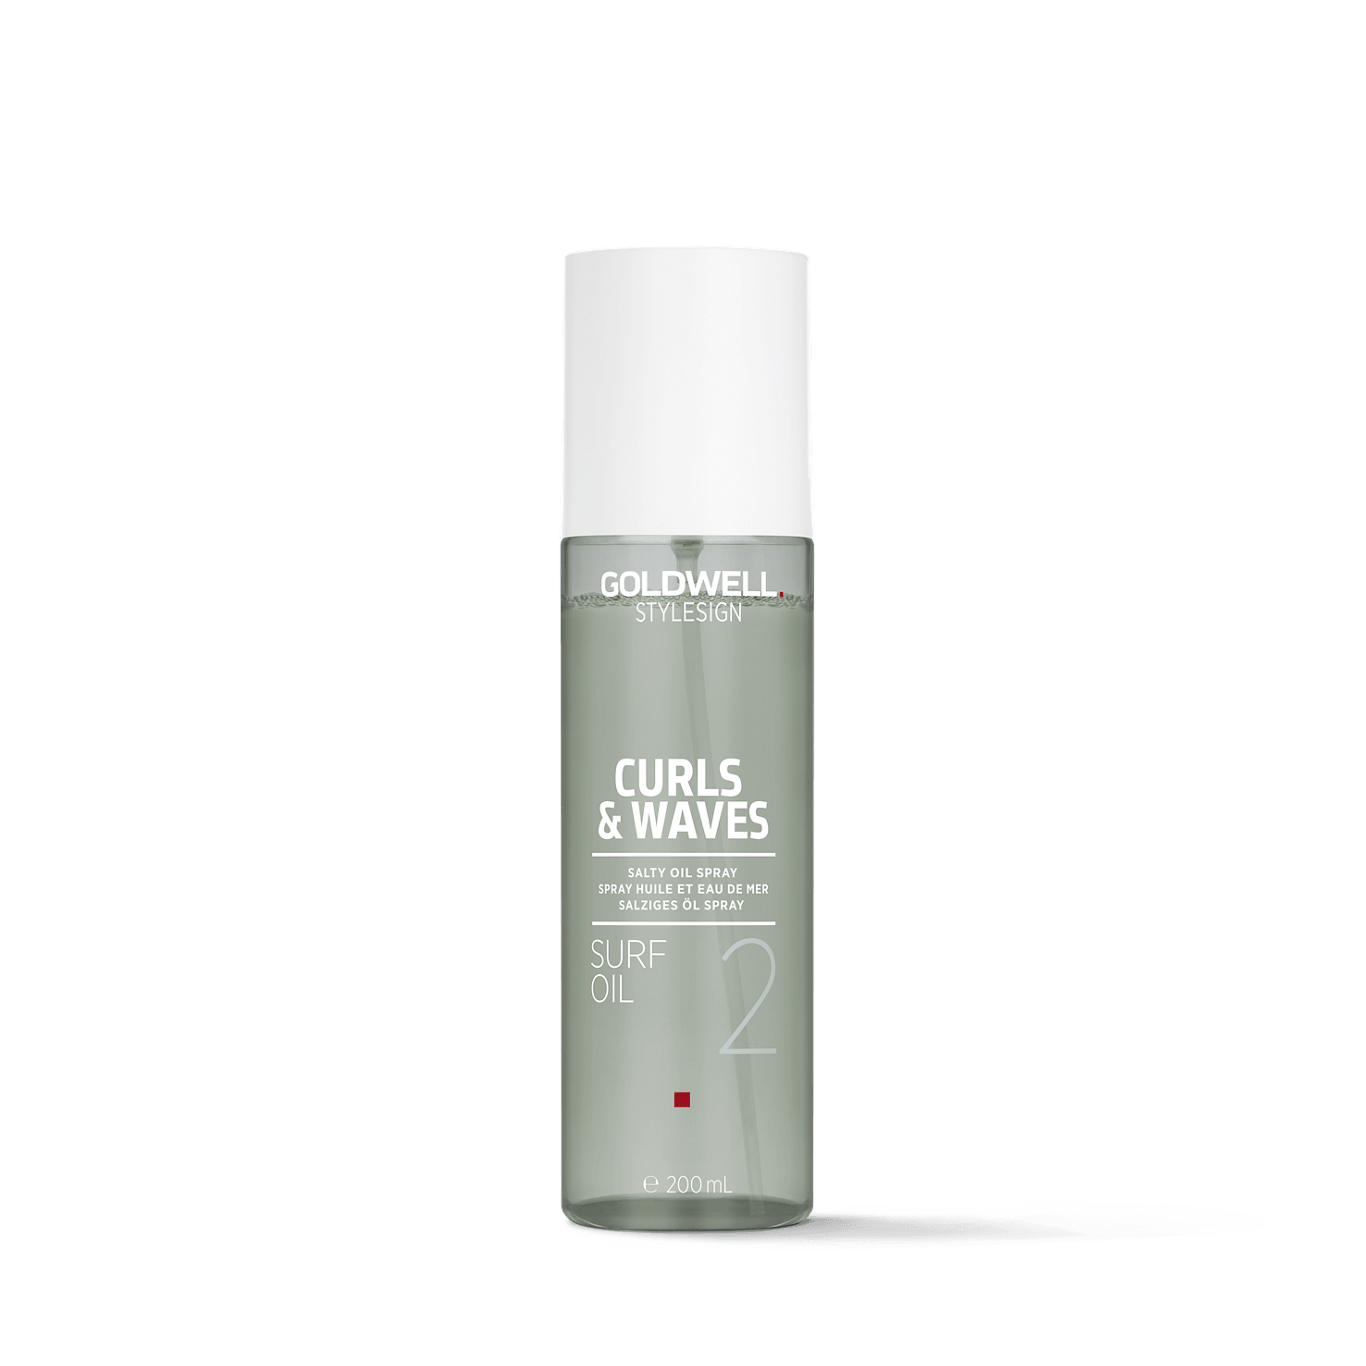 Goldwell Style Sign Curls & Waves Surf Oil - Exquisite Laser Clinic